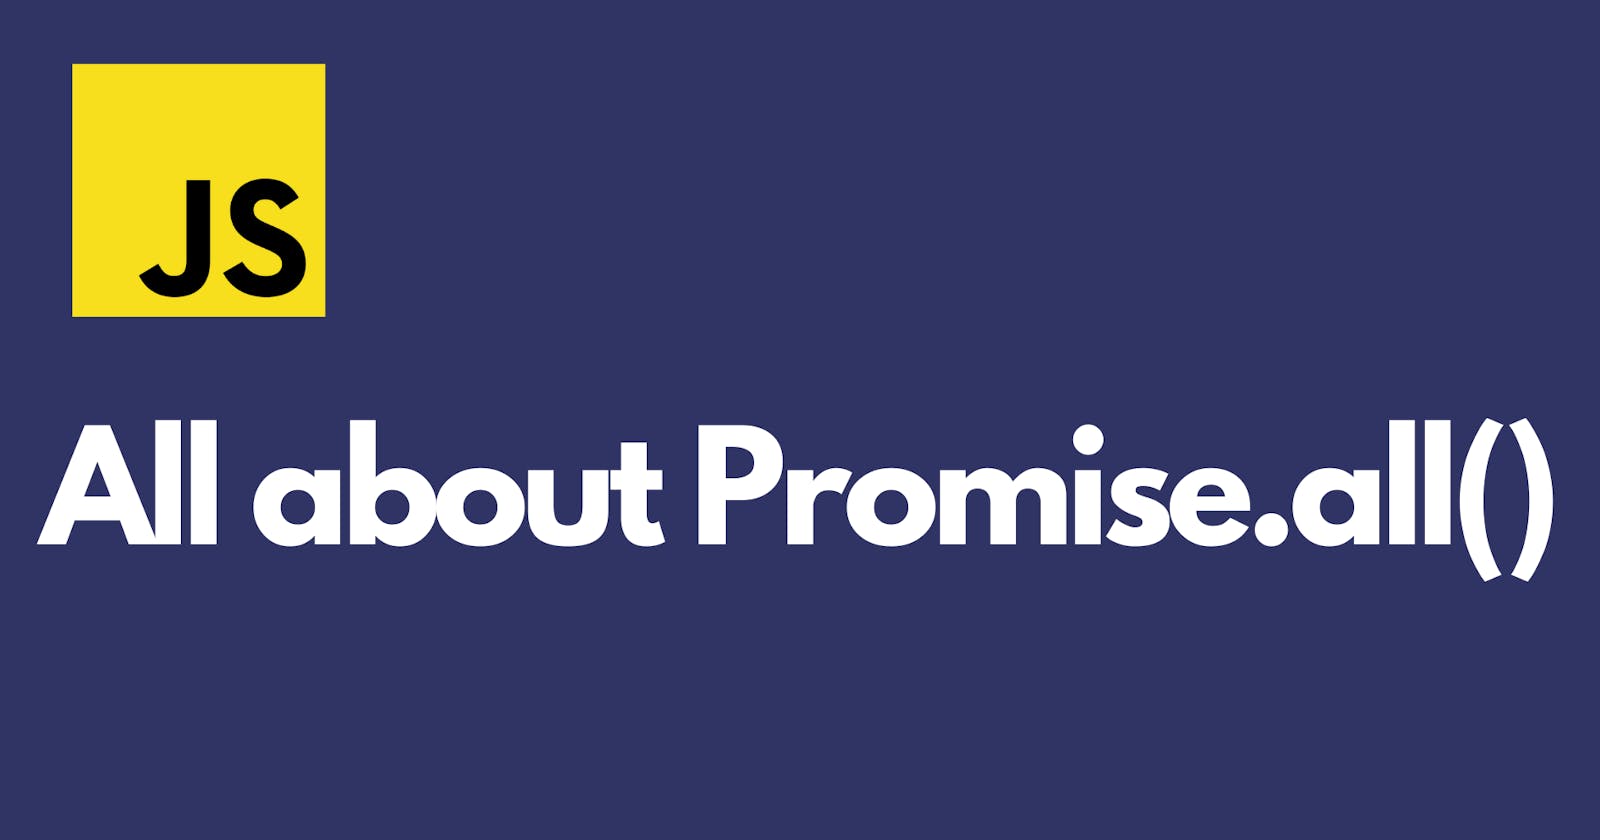 All about promise.all()